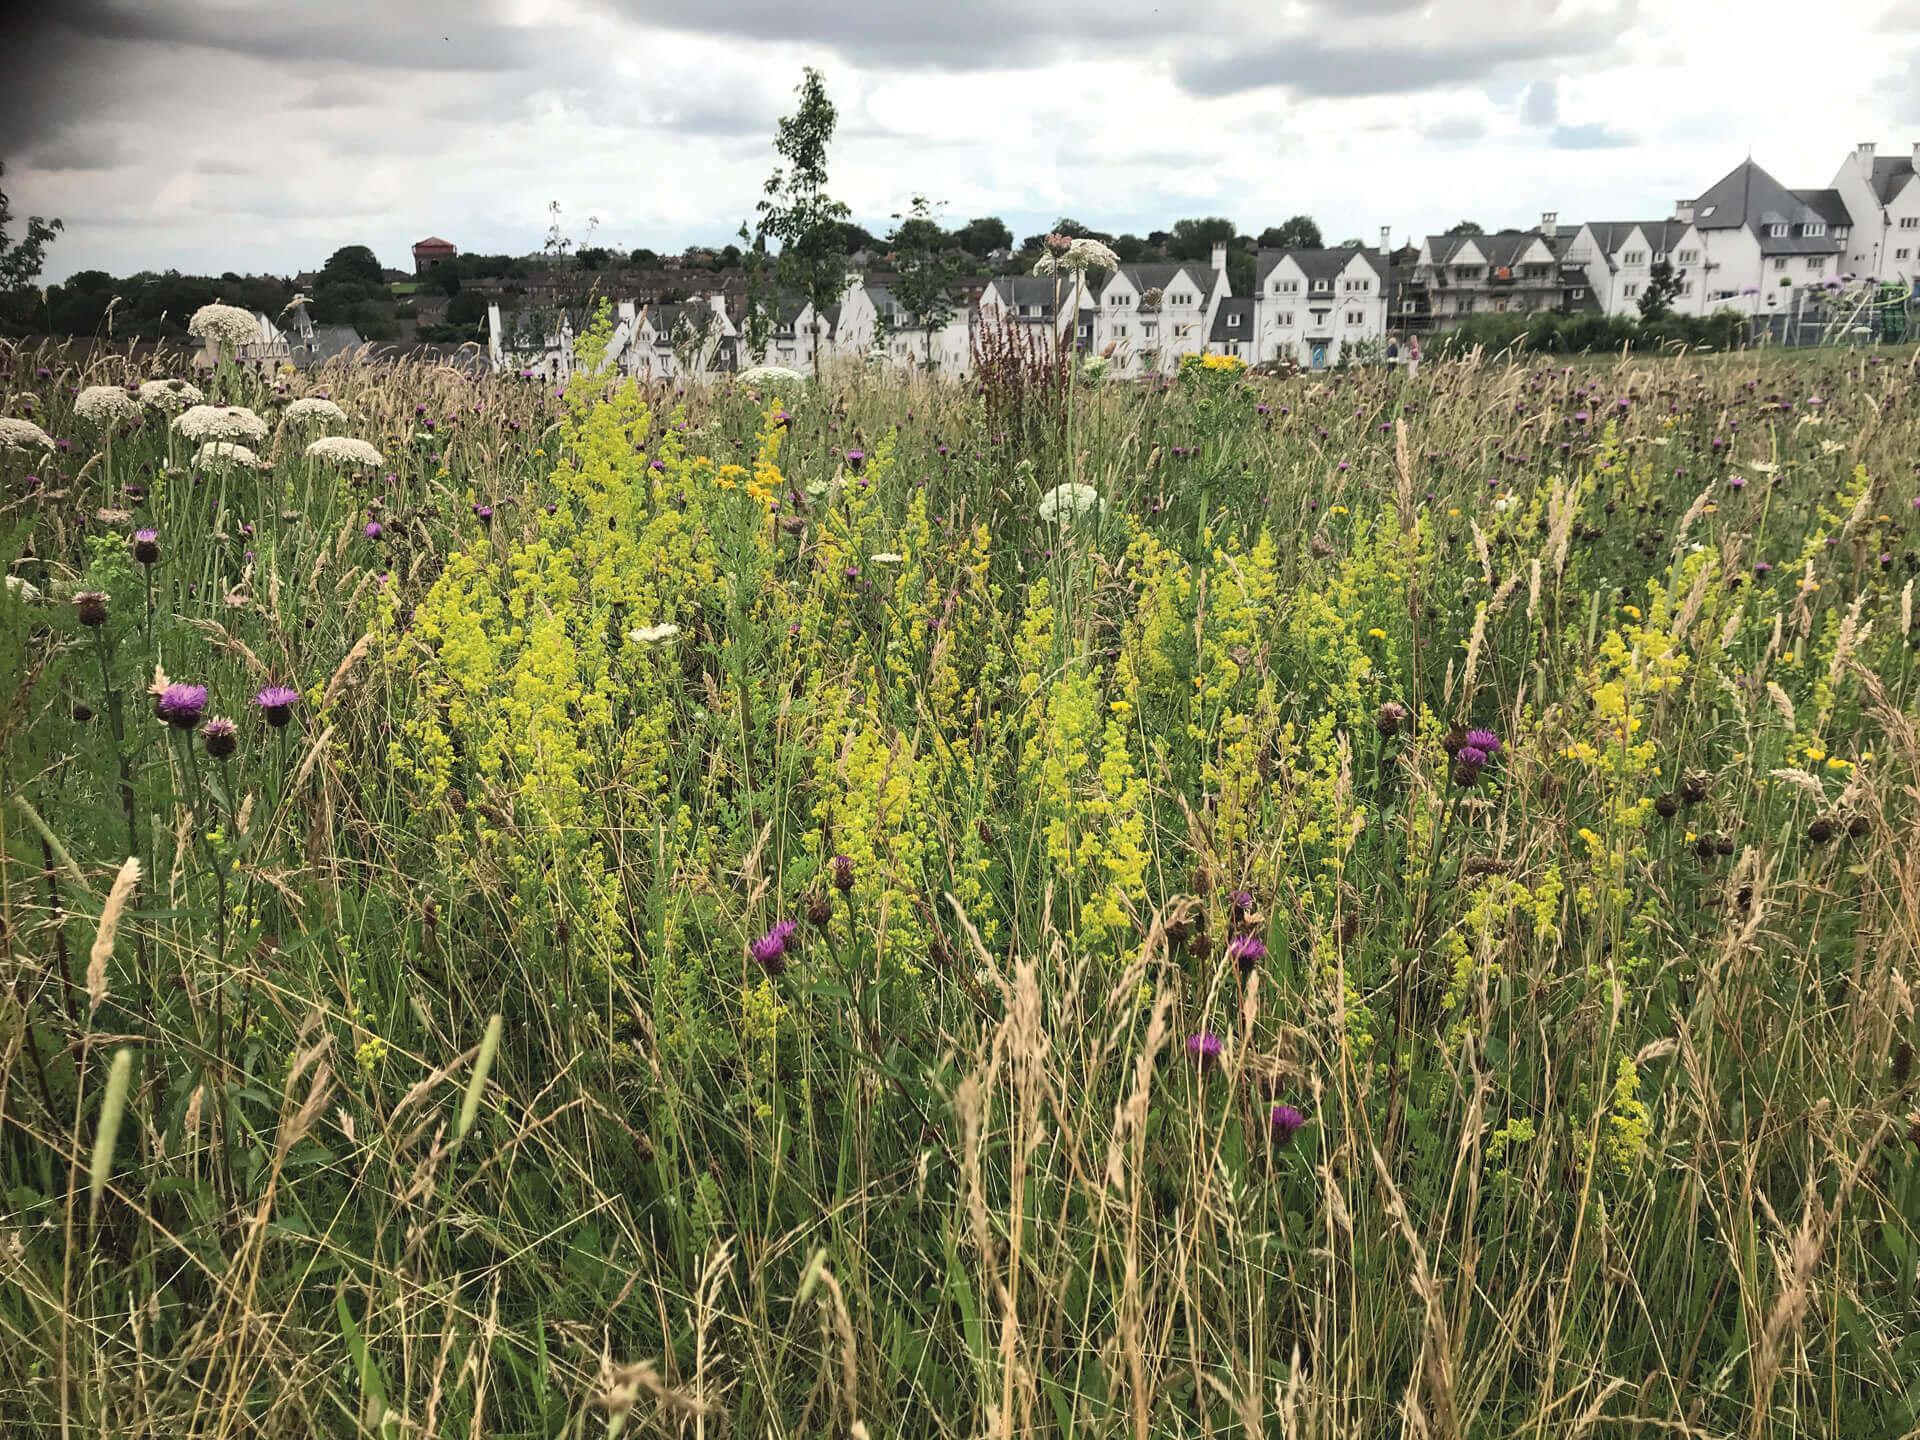 Lady Bedstraw thriving in wildflower meadows, the Great Field, Poundbury